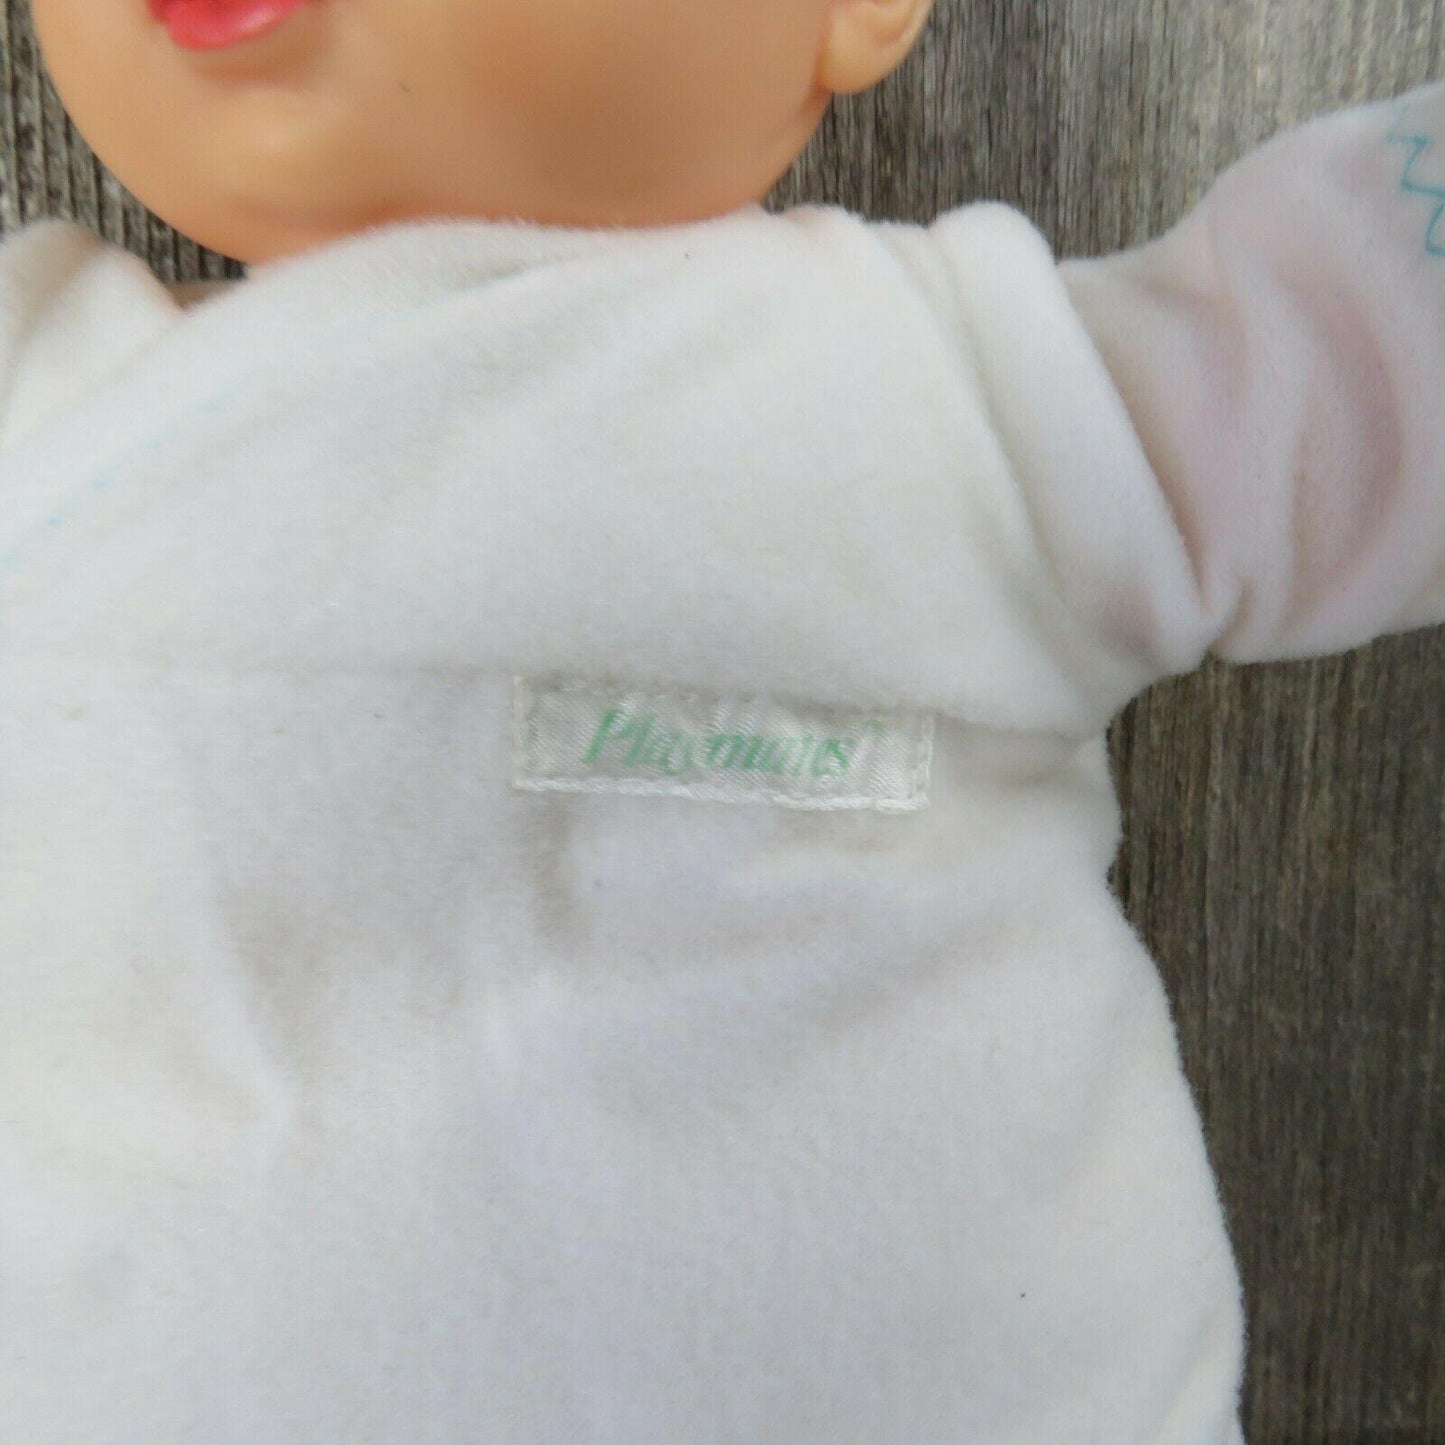 Sleeping Baby Soft Body Doll Playmates White Tie Nightgown Infant Toy 8712